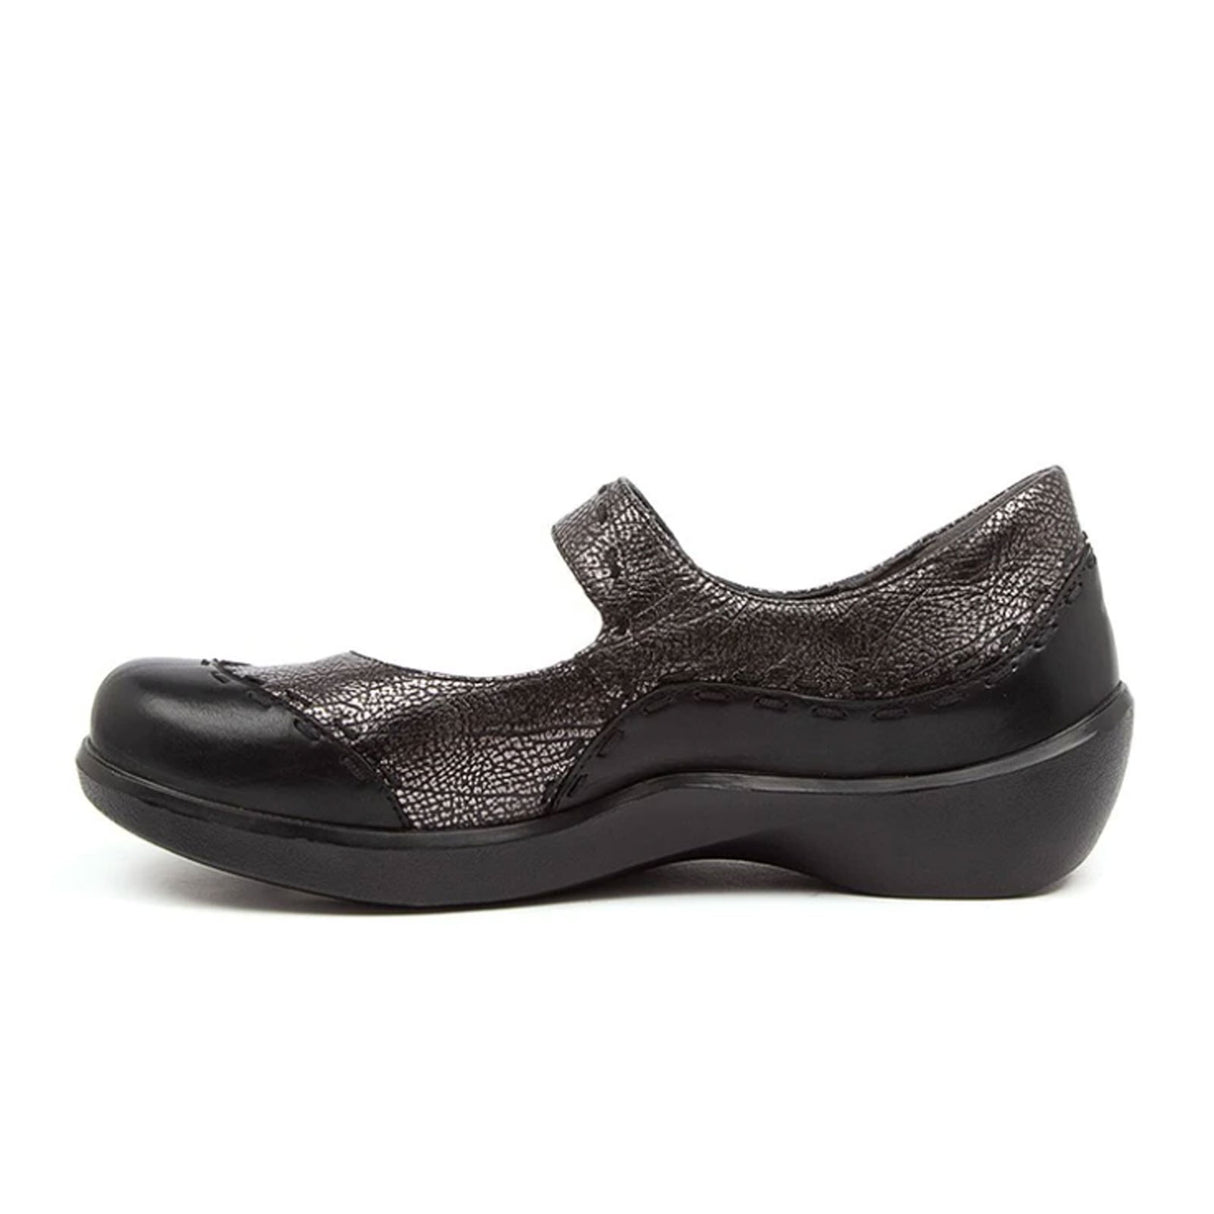 Ziera Gummibear Mary Jane (Women) - Black Antique Pewter Leather Dress-Casual - Mary Janes - The Heel Shoe Fitters